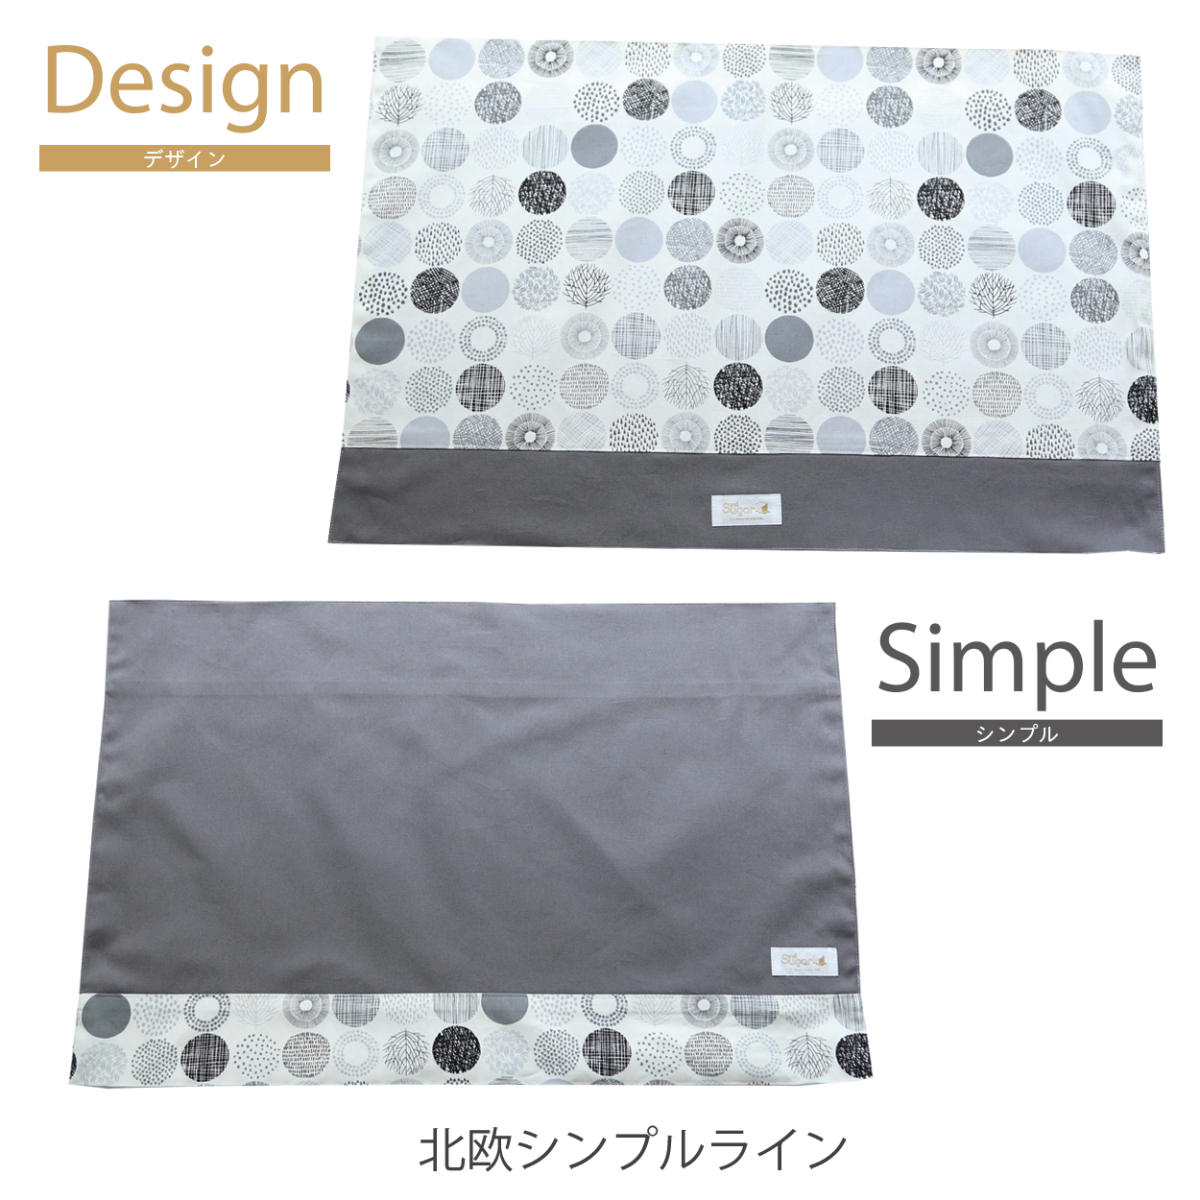  reversible largish place mat large size desk size Large type girl man lunch mat 40cm×60cm elementary school child go in . go in . goods 